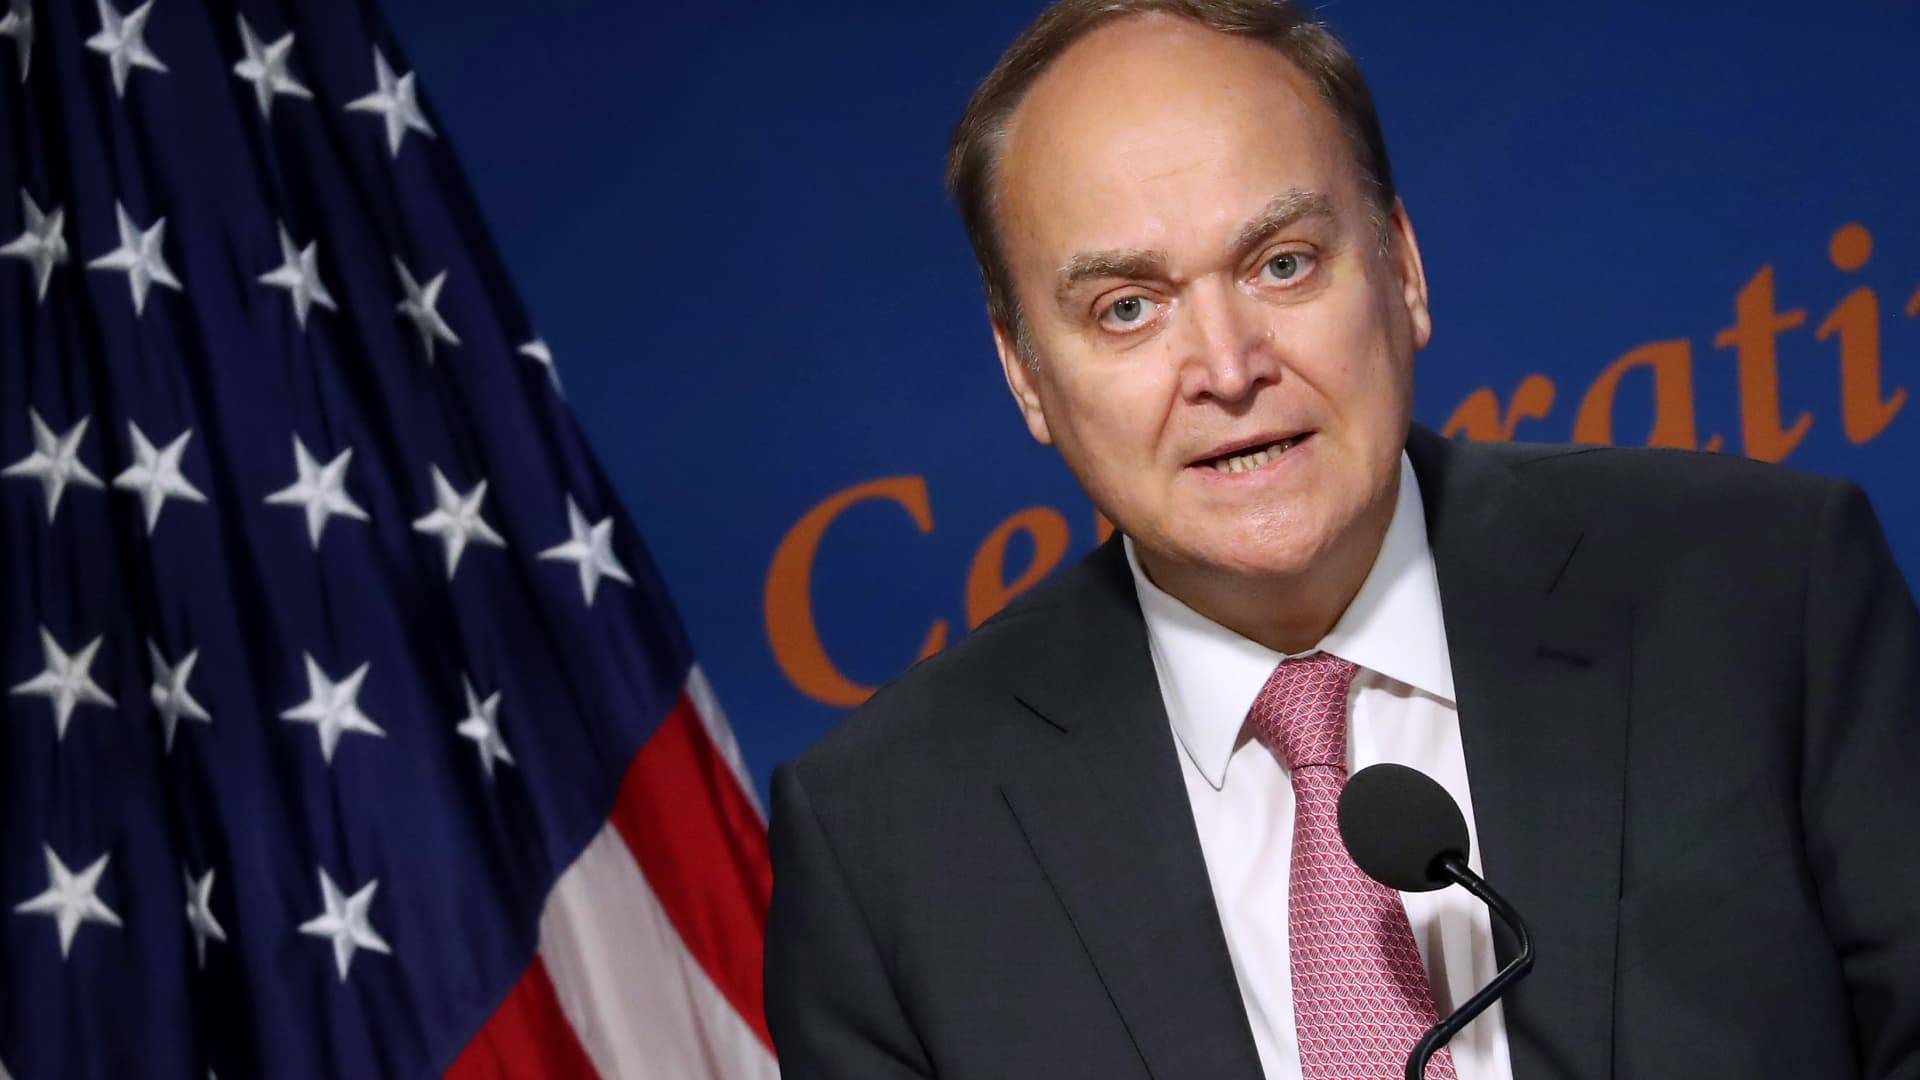 Russian Ambassador to the United States Anatoly Antonov speaks during a discussion about the legacy of Anatoly Dobrynin on Nov. 18, 2019, in Washington, DC.